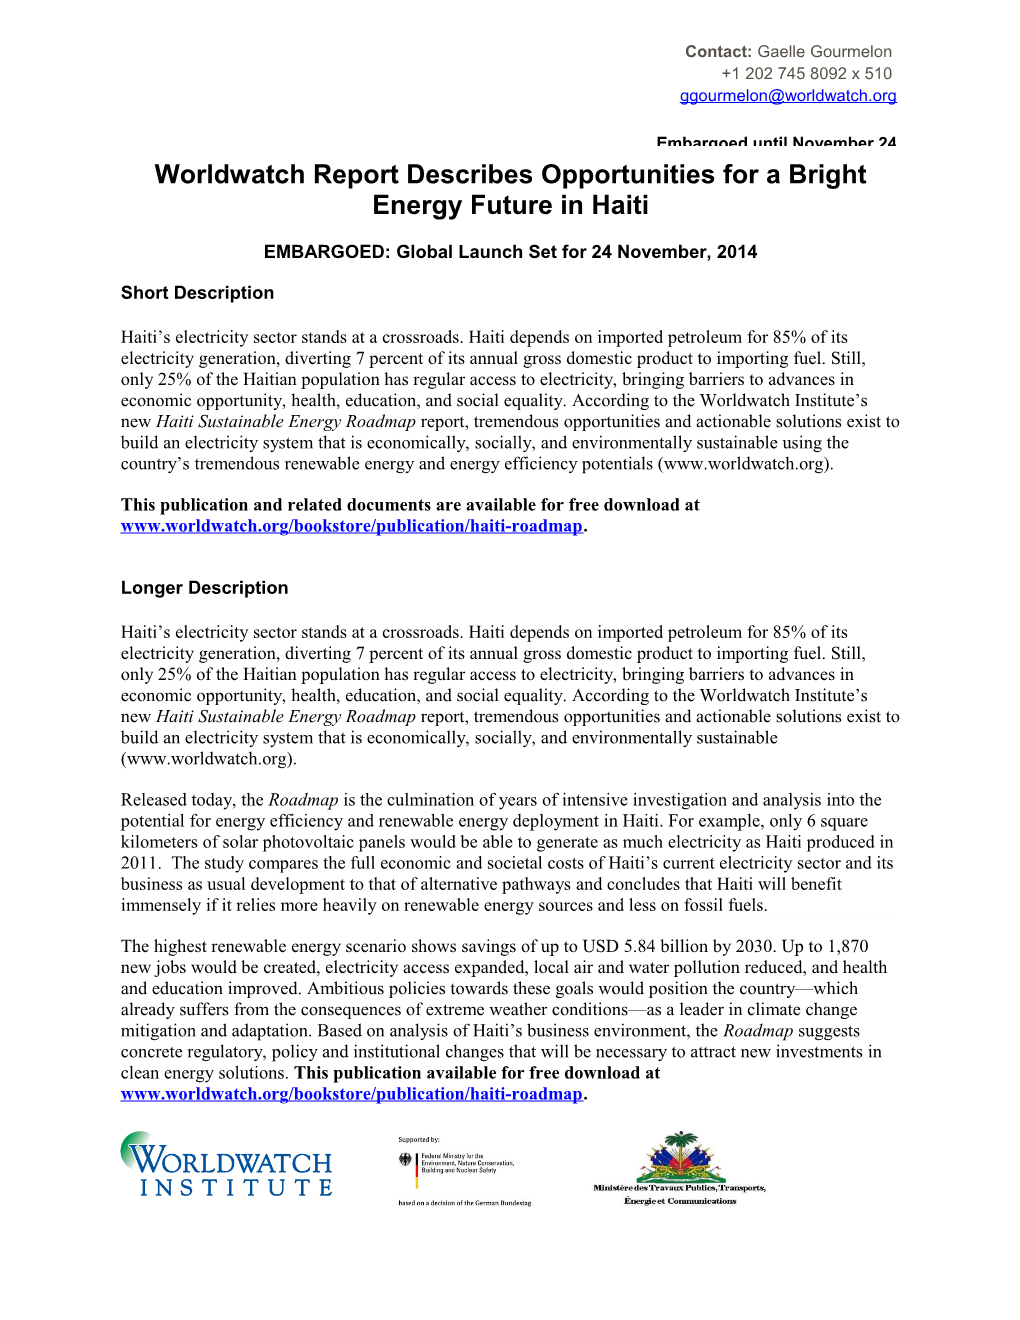 Worldwatch Report Describes Opportunities for a Bright Energy Future in Haiti